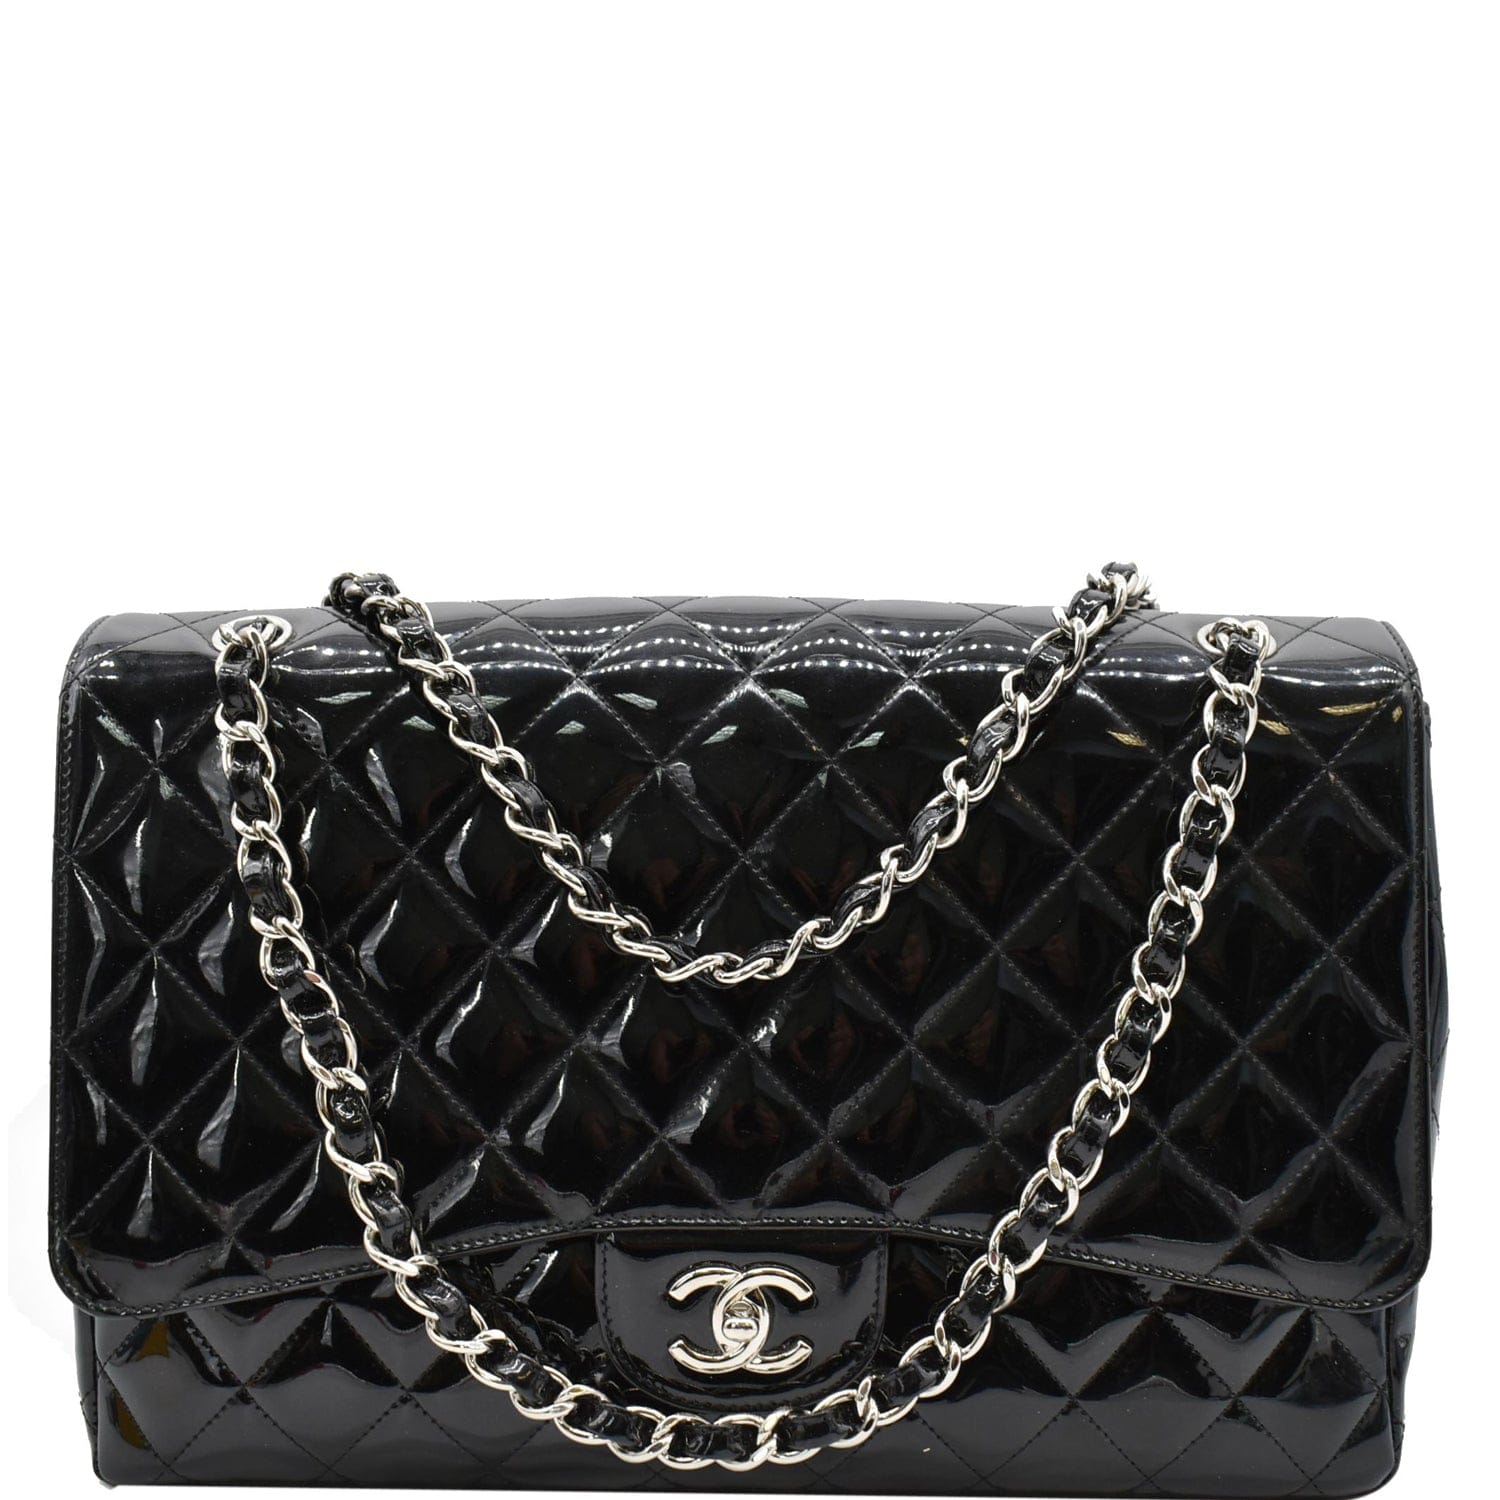 Chanel Classic Maxi Single Quilted Patent Leather Bag